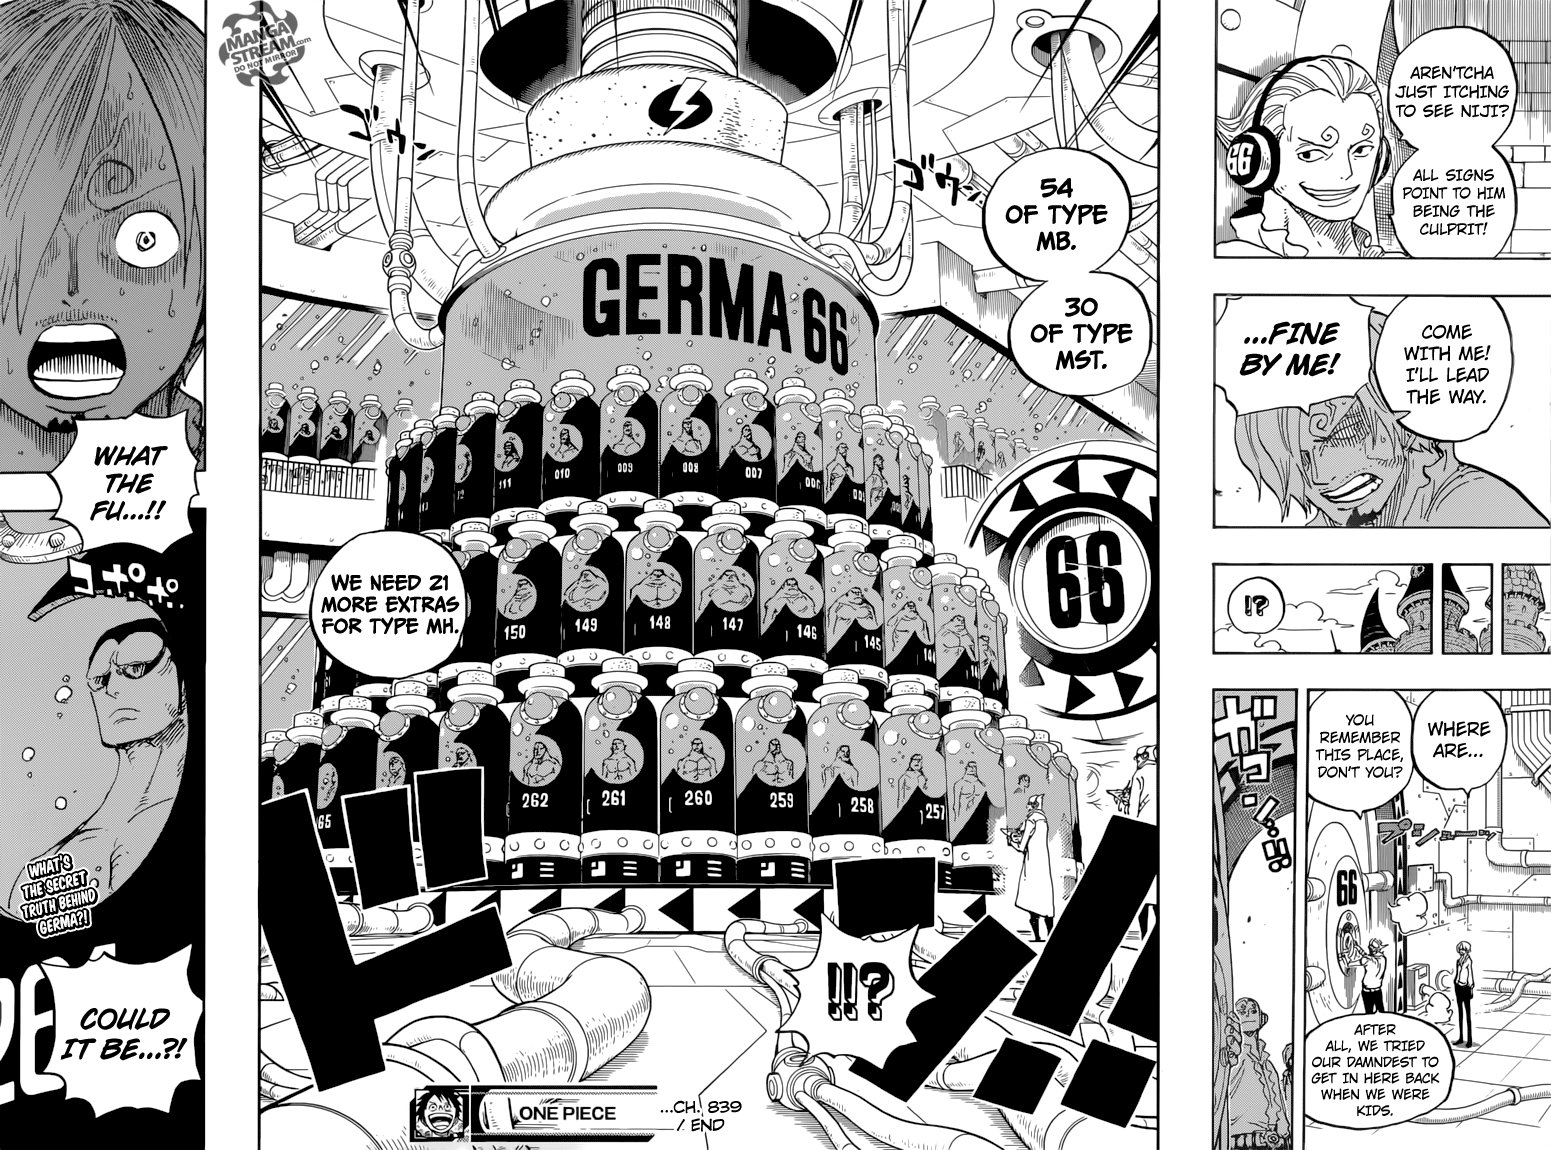 Chin Germa 66 Gives Me Some Very Nazi Germany Vibes Sanji Isn T Scared To Talk Shit To His Older Brother Now Especially After Everything He S Done To Him Before The